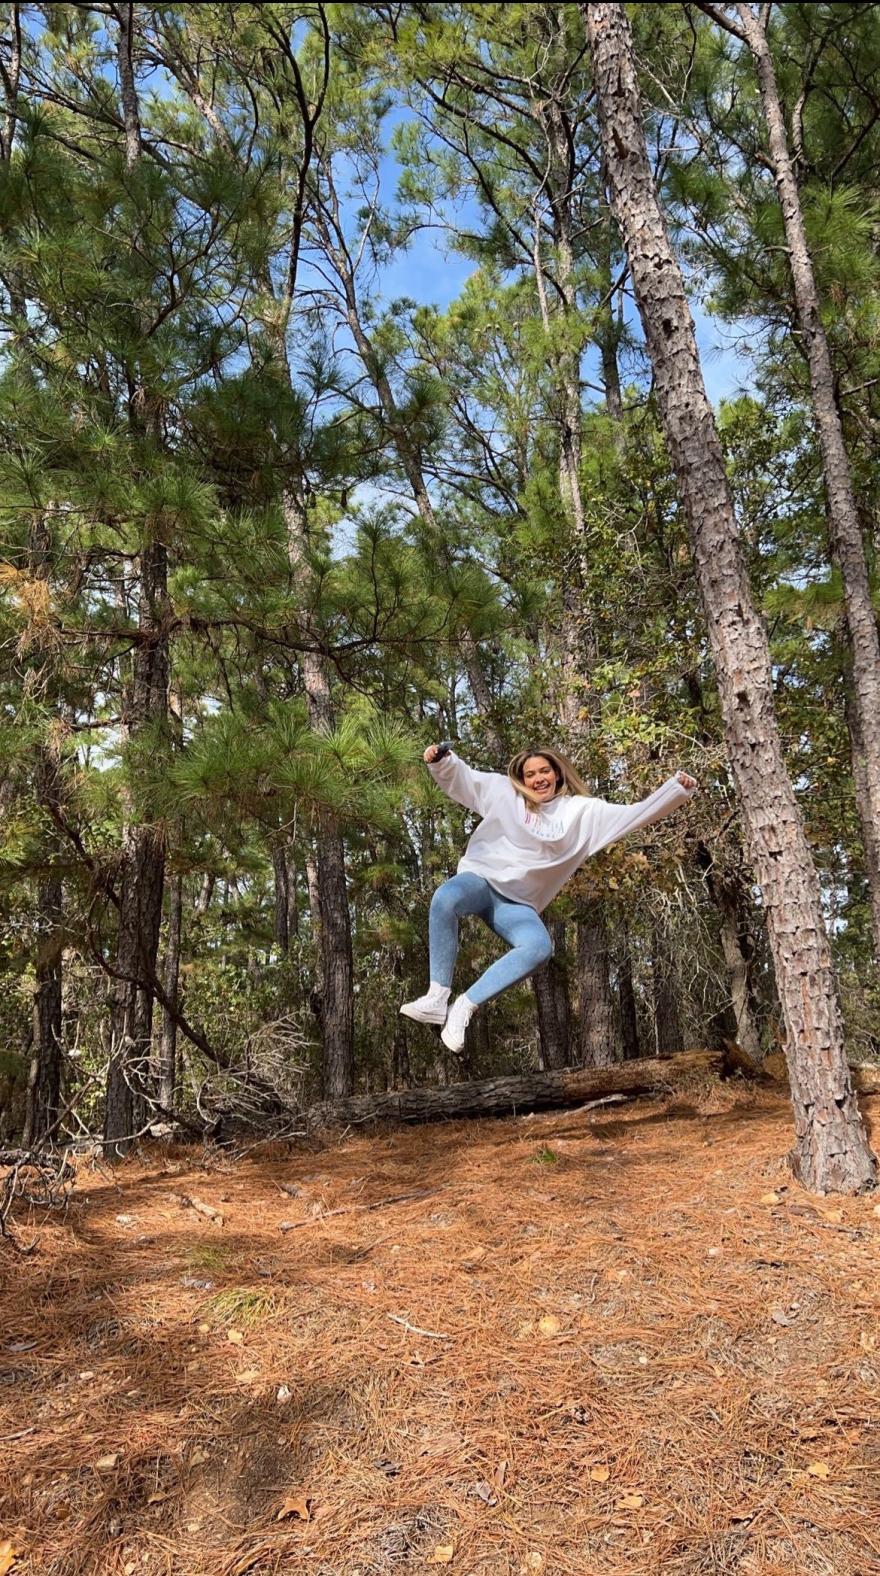 Honor jumping while posing for a photo in a forest. 